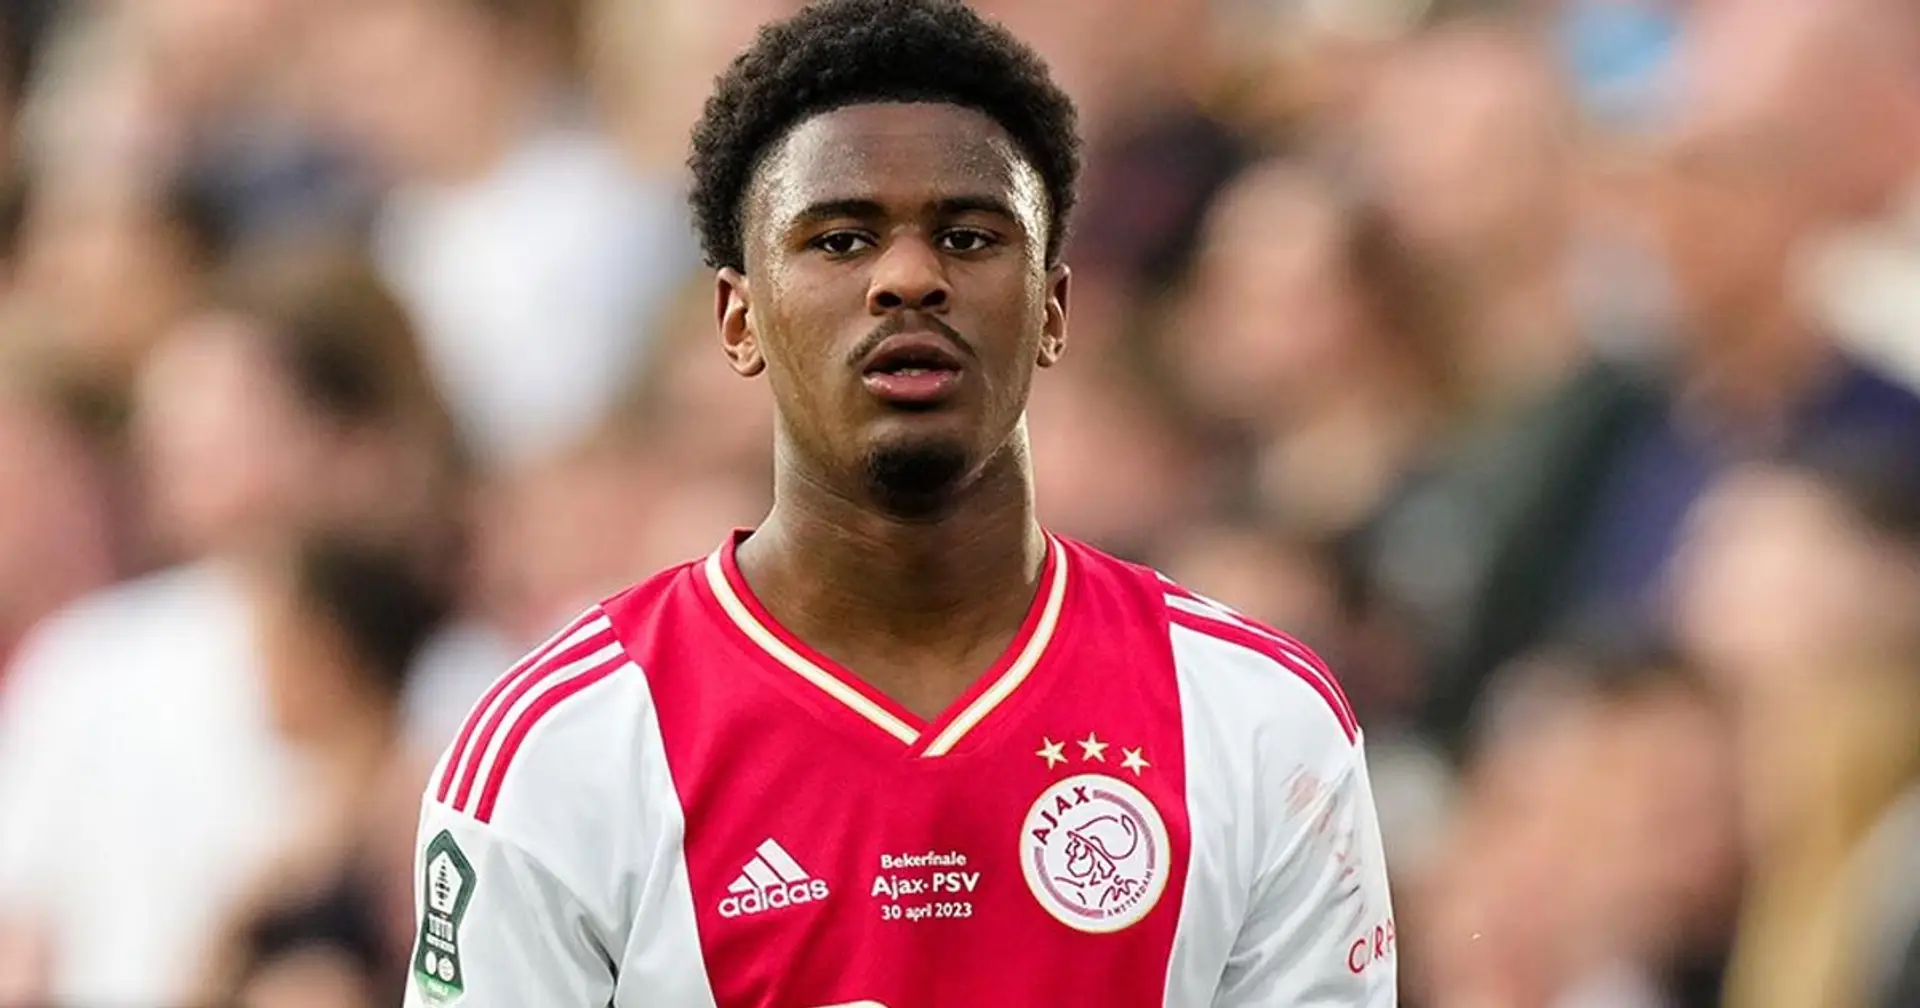 Arsenal scouting Ajax star Jorrel Hato 'for months' - but there's a catch